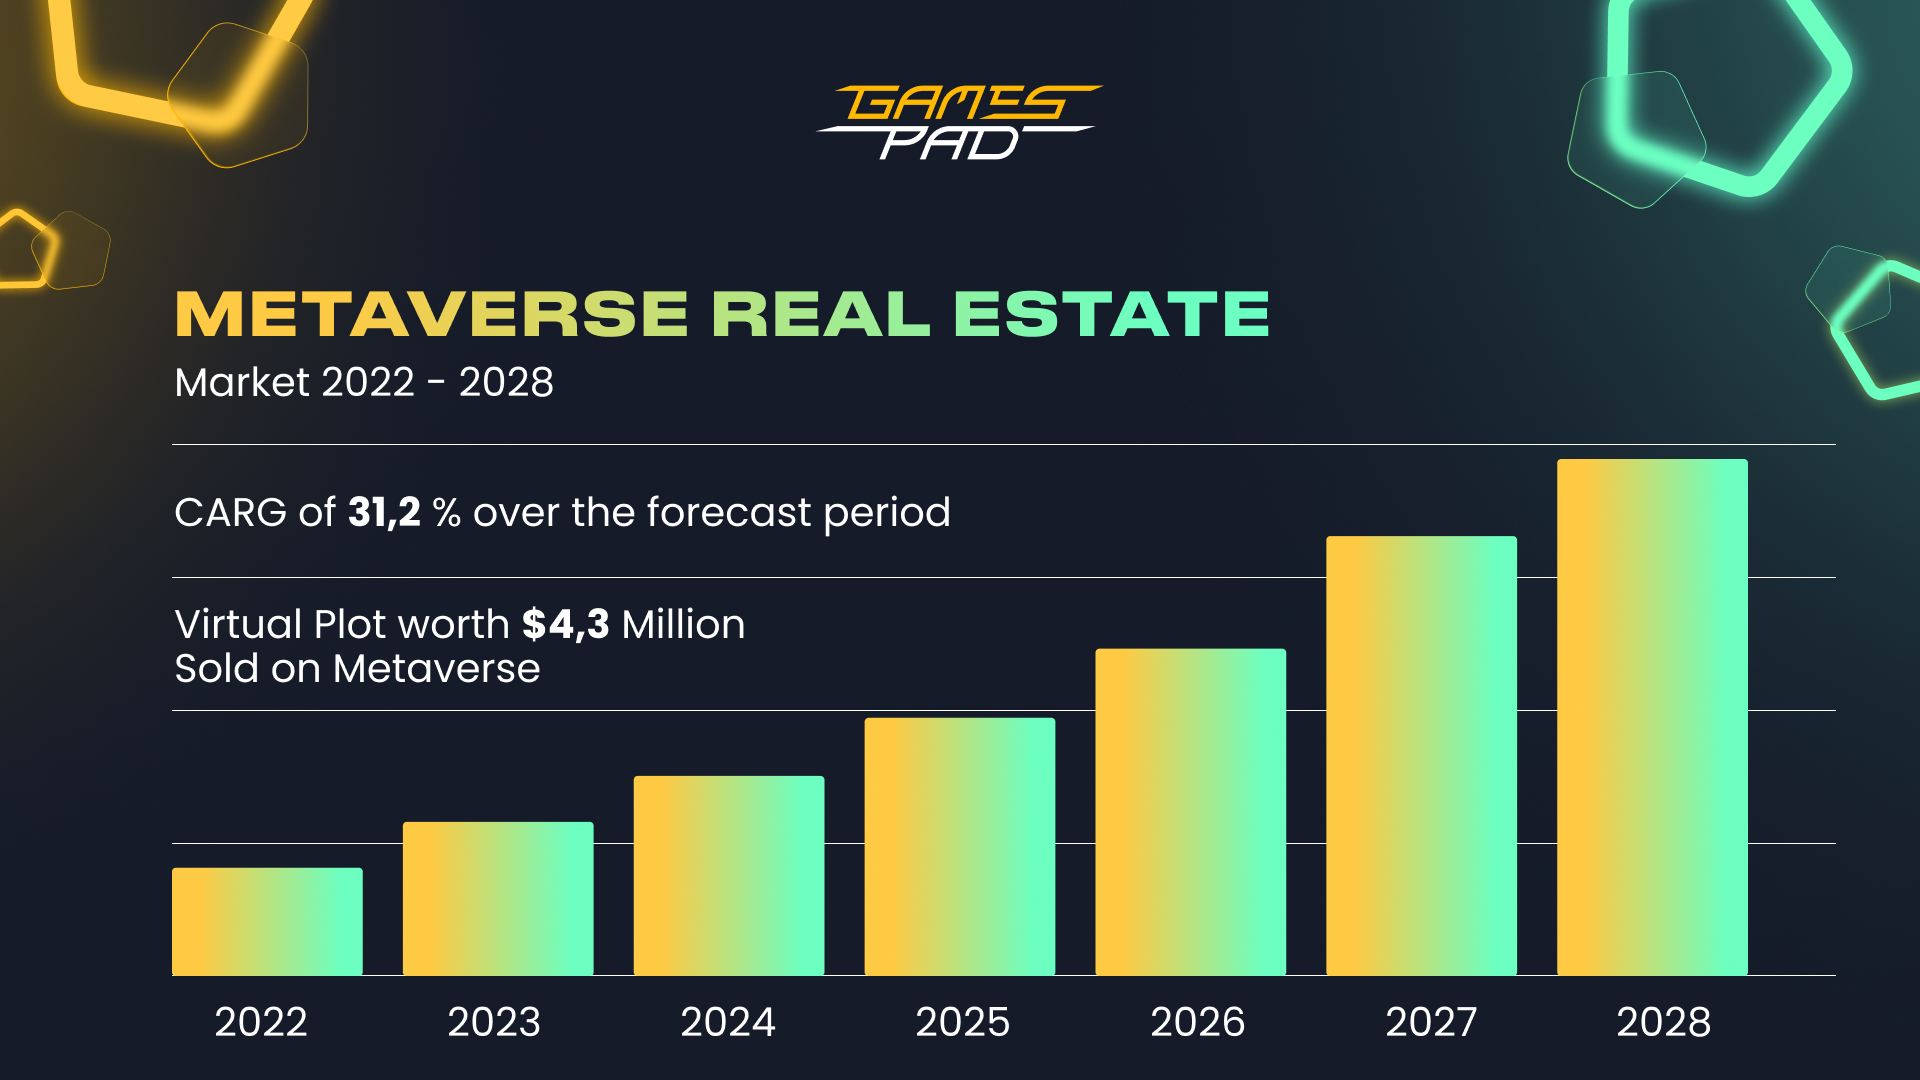 GamesPad: What Does It Mean to Buy Land In The Metaverse 3